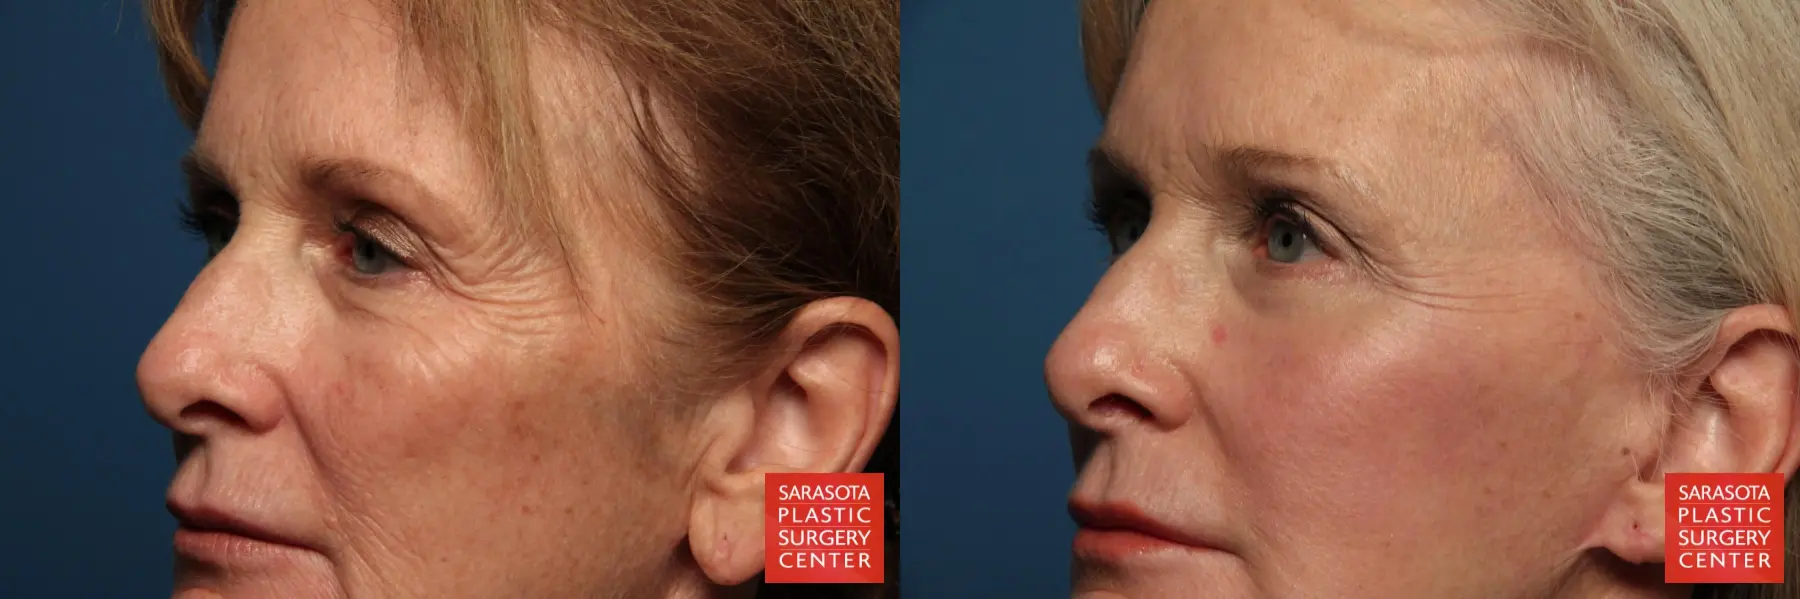 Eyelid Lift: Patient 4 - Before and After 2